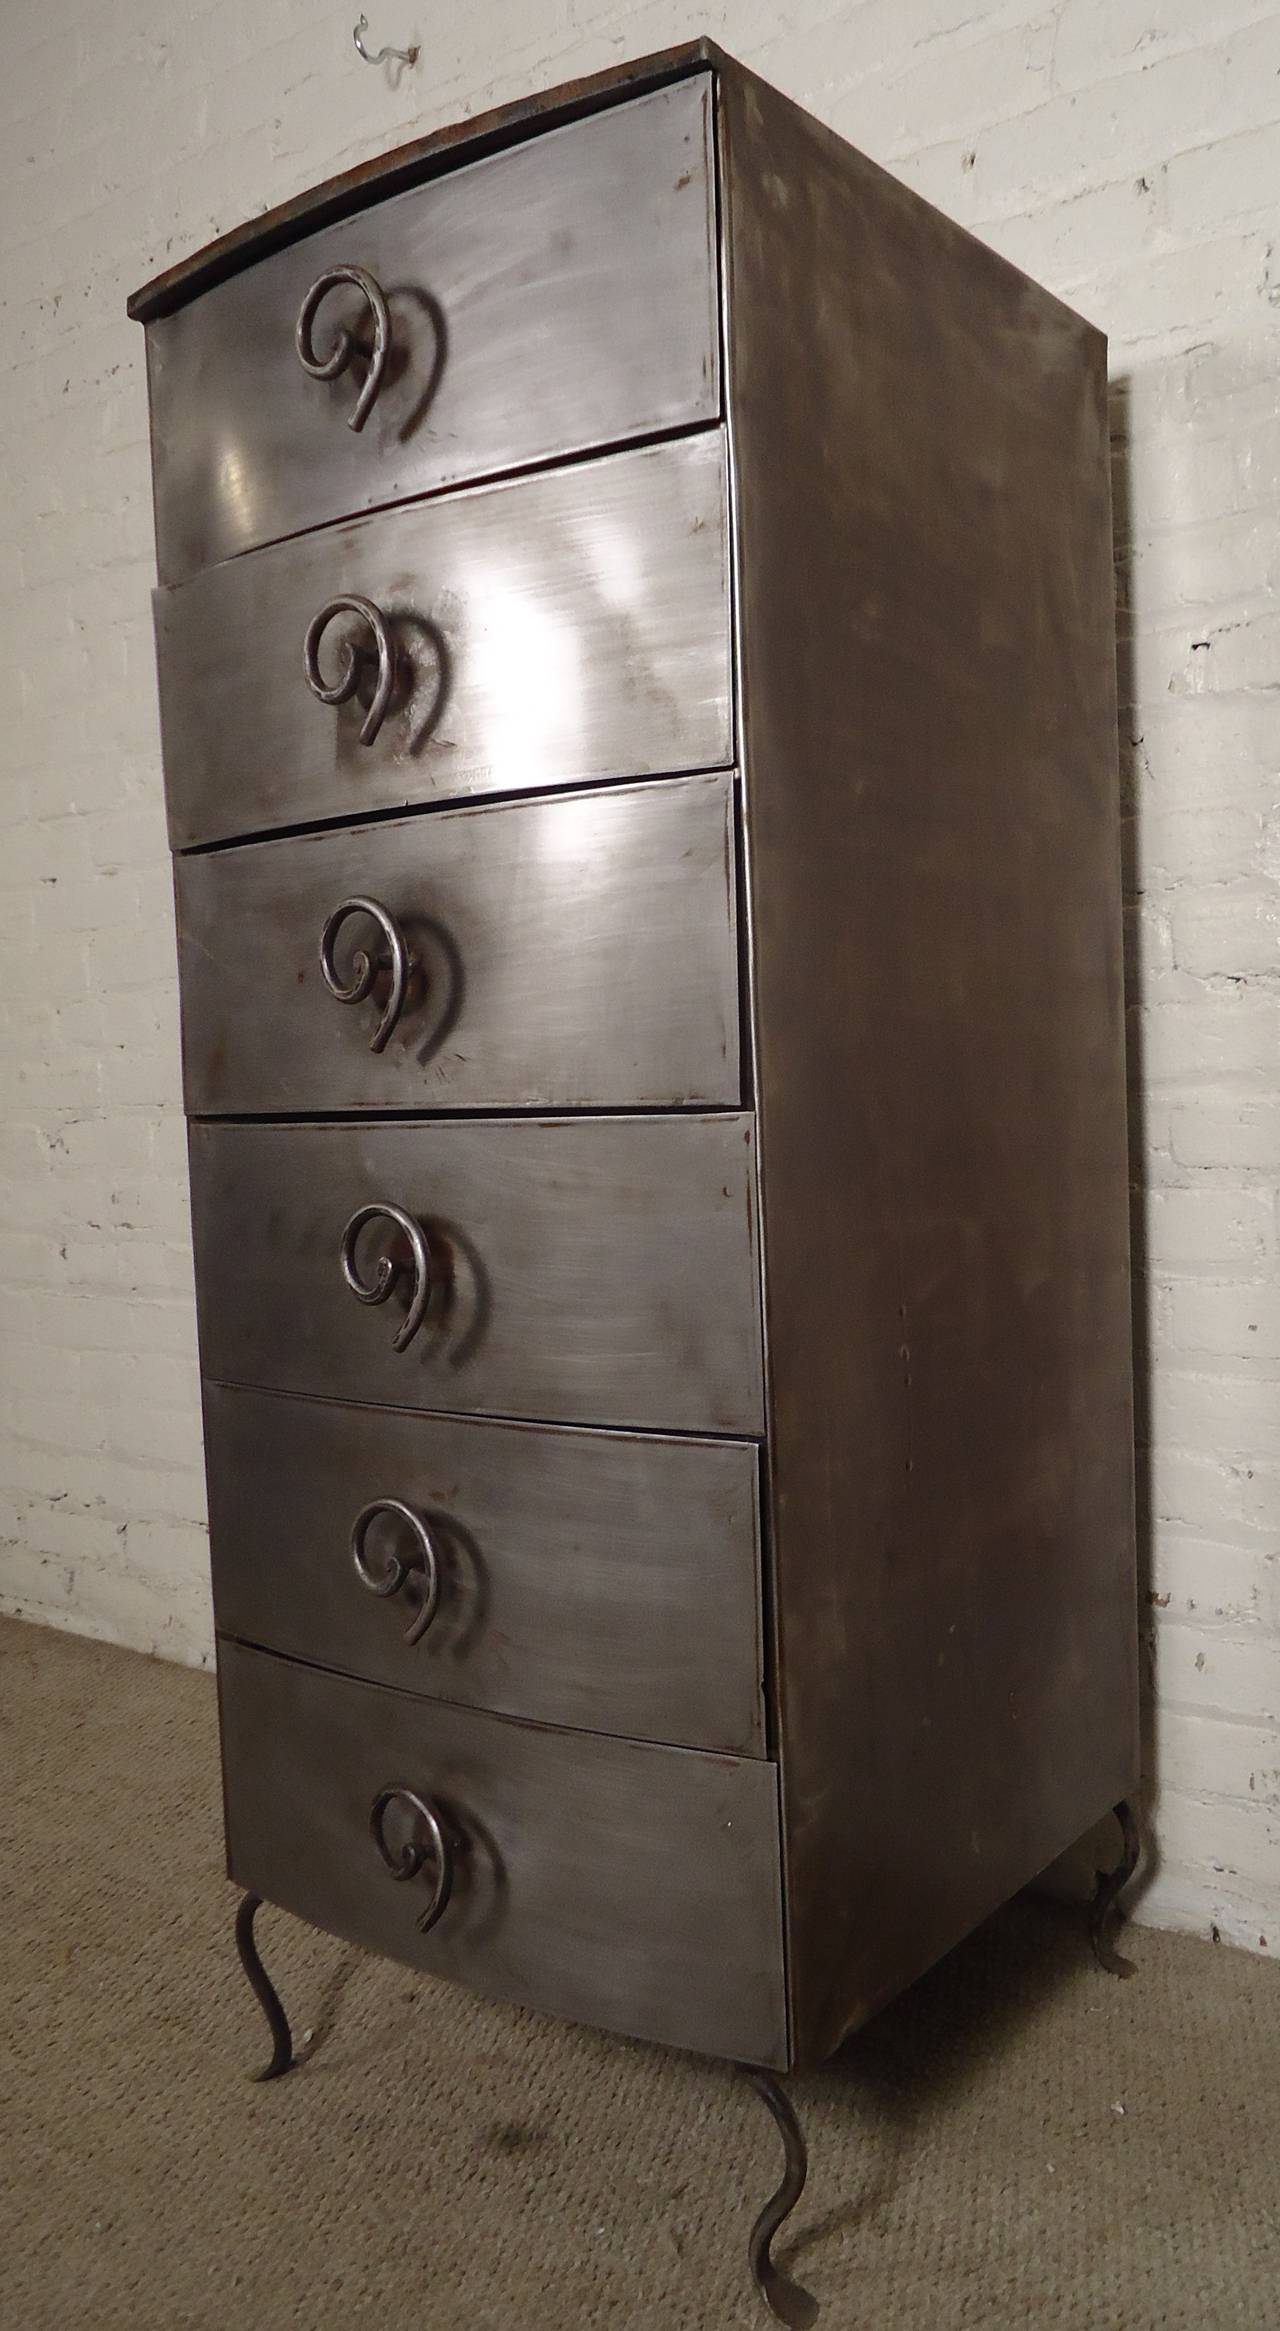 American Industrial Style Six-Drawer Dresser with Sculpted Handles and Legs